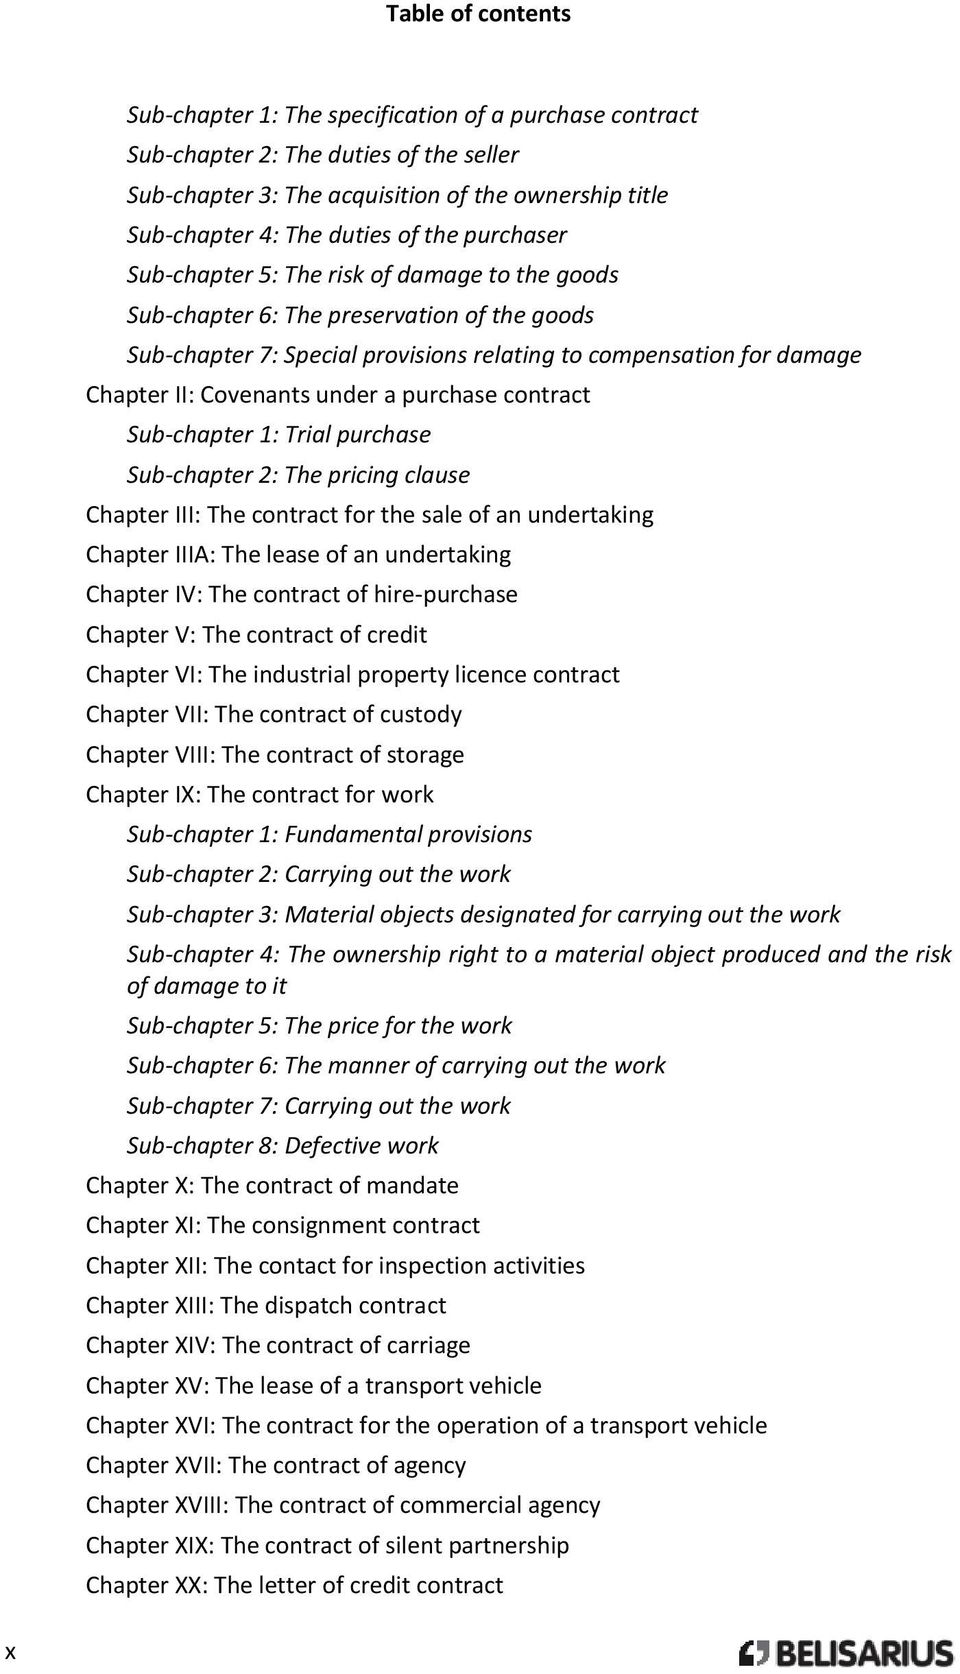 under a purchase contract Sub-chapter 1: Trial purchase Sub-chapter 2: The pricing clause Chapter III: The contract for the sale of an undertaking Chapter IIIA: The lease of an undertaking Chapter